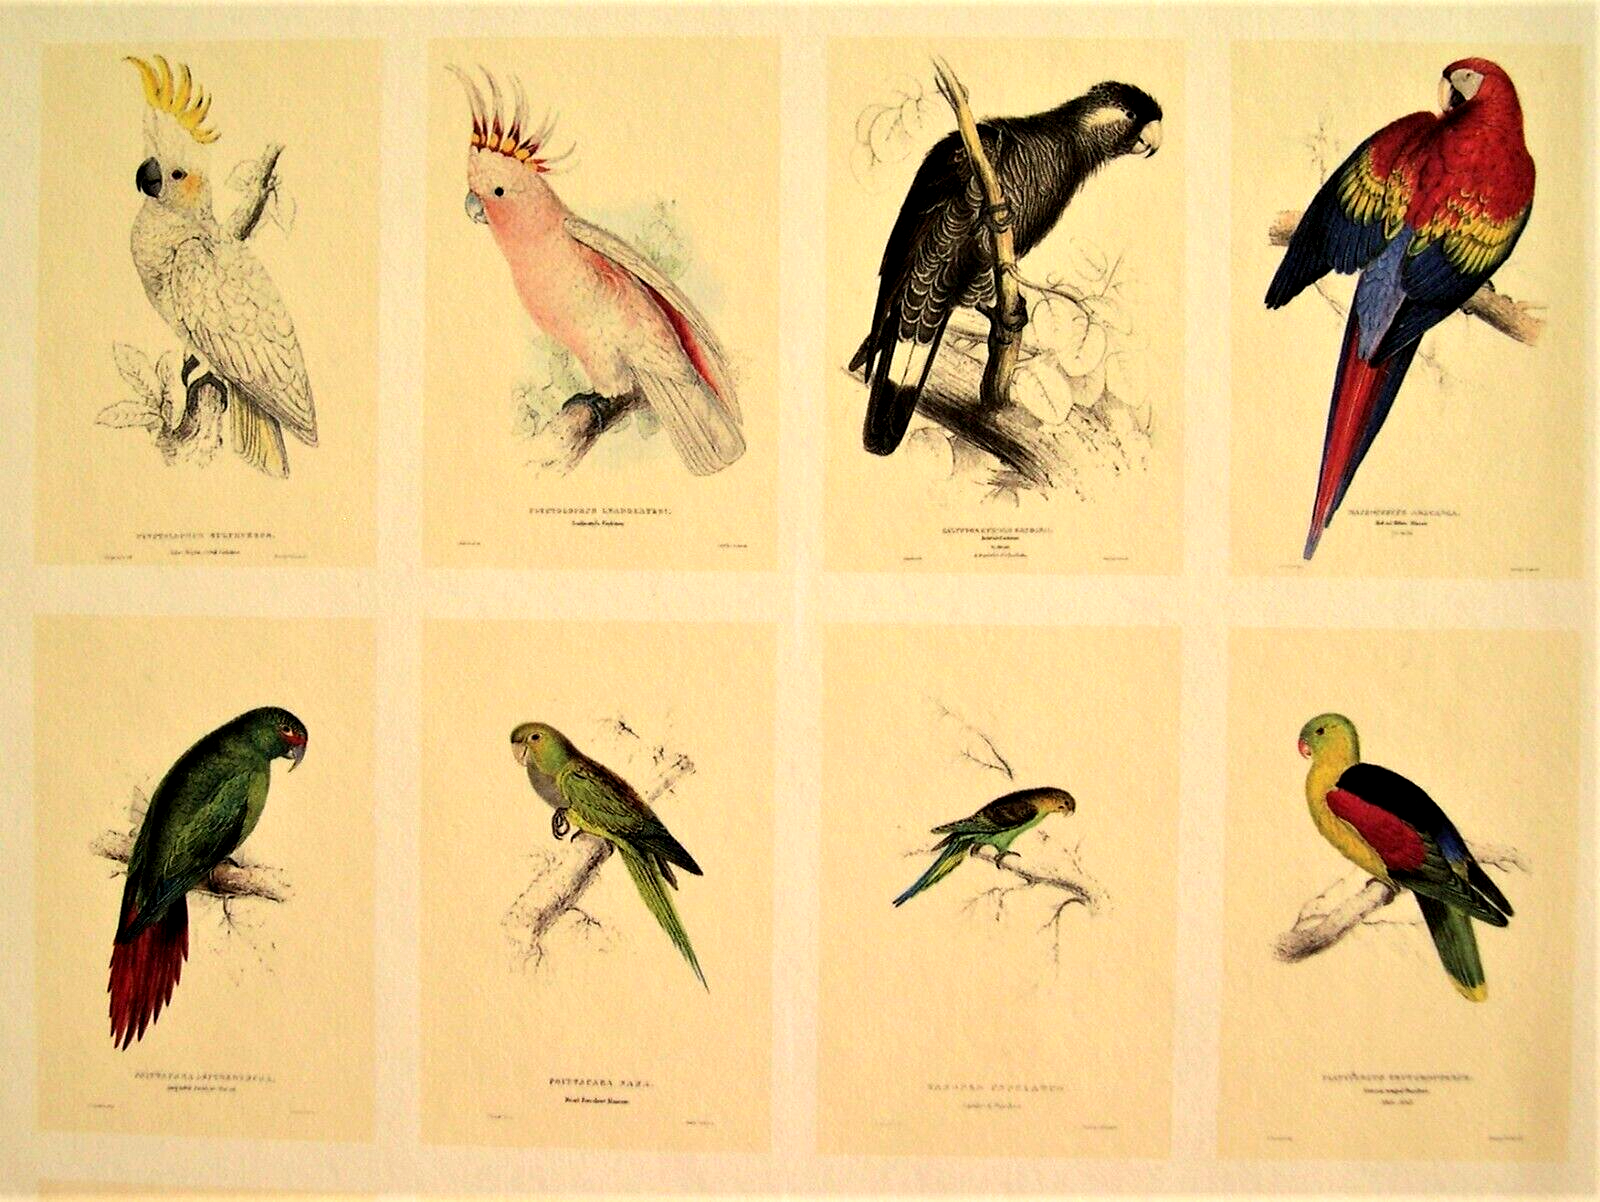 42 Lear Parrot Prints; The Complete Set Directly From His Original 1832 Folio Без бренда